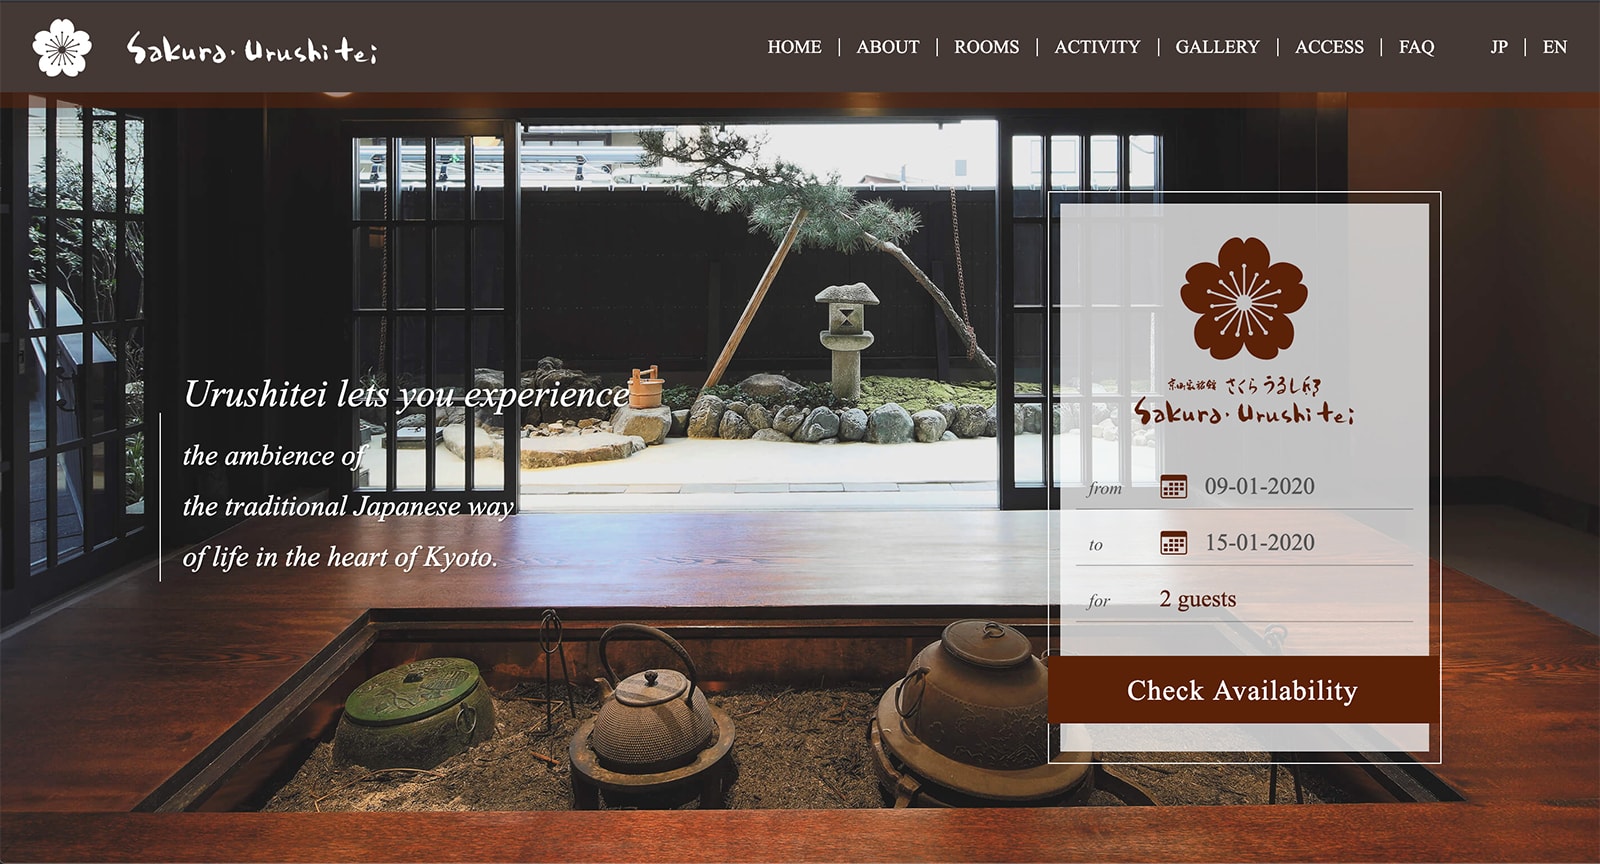 How to book a ryokan in Kyoto with discount?